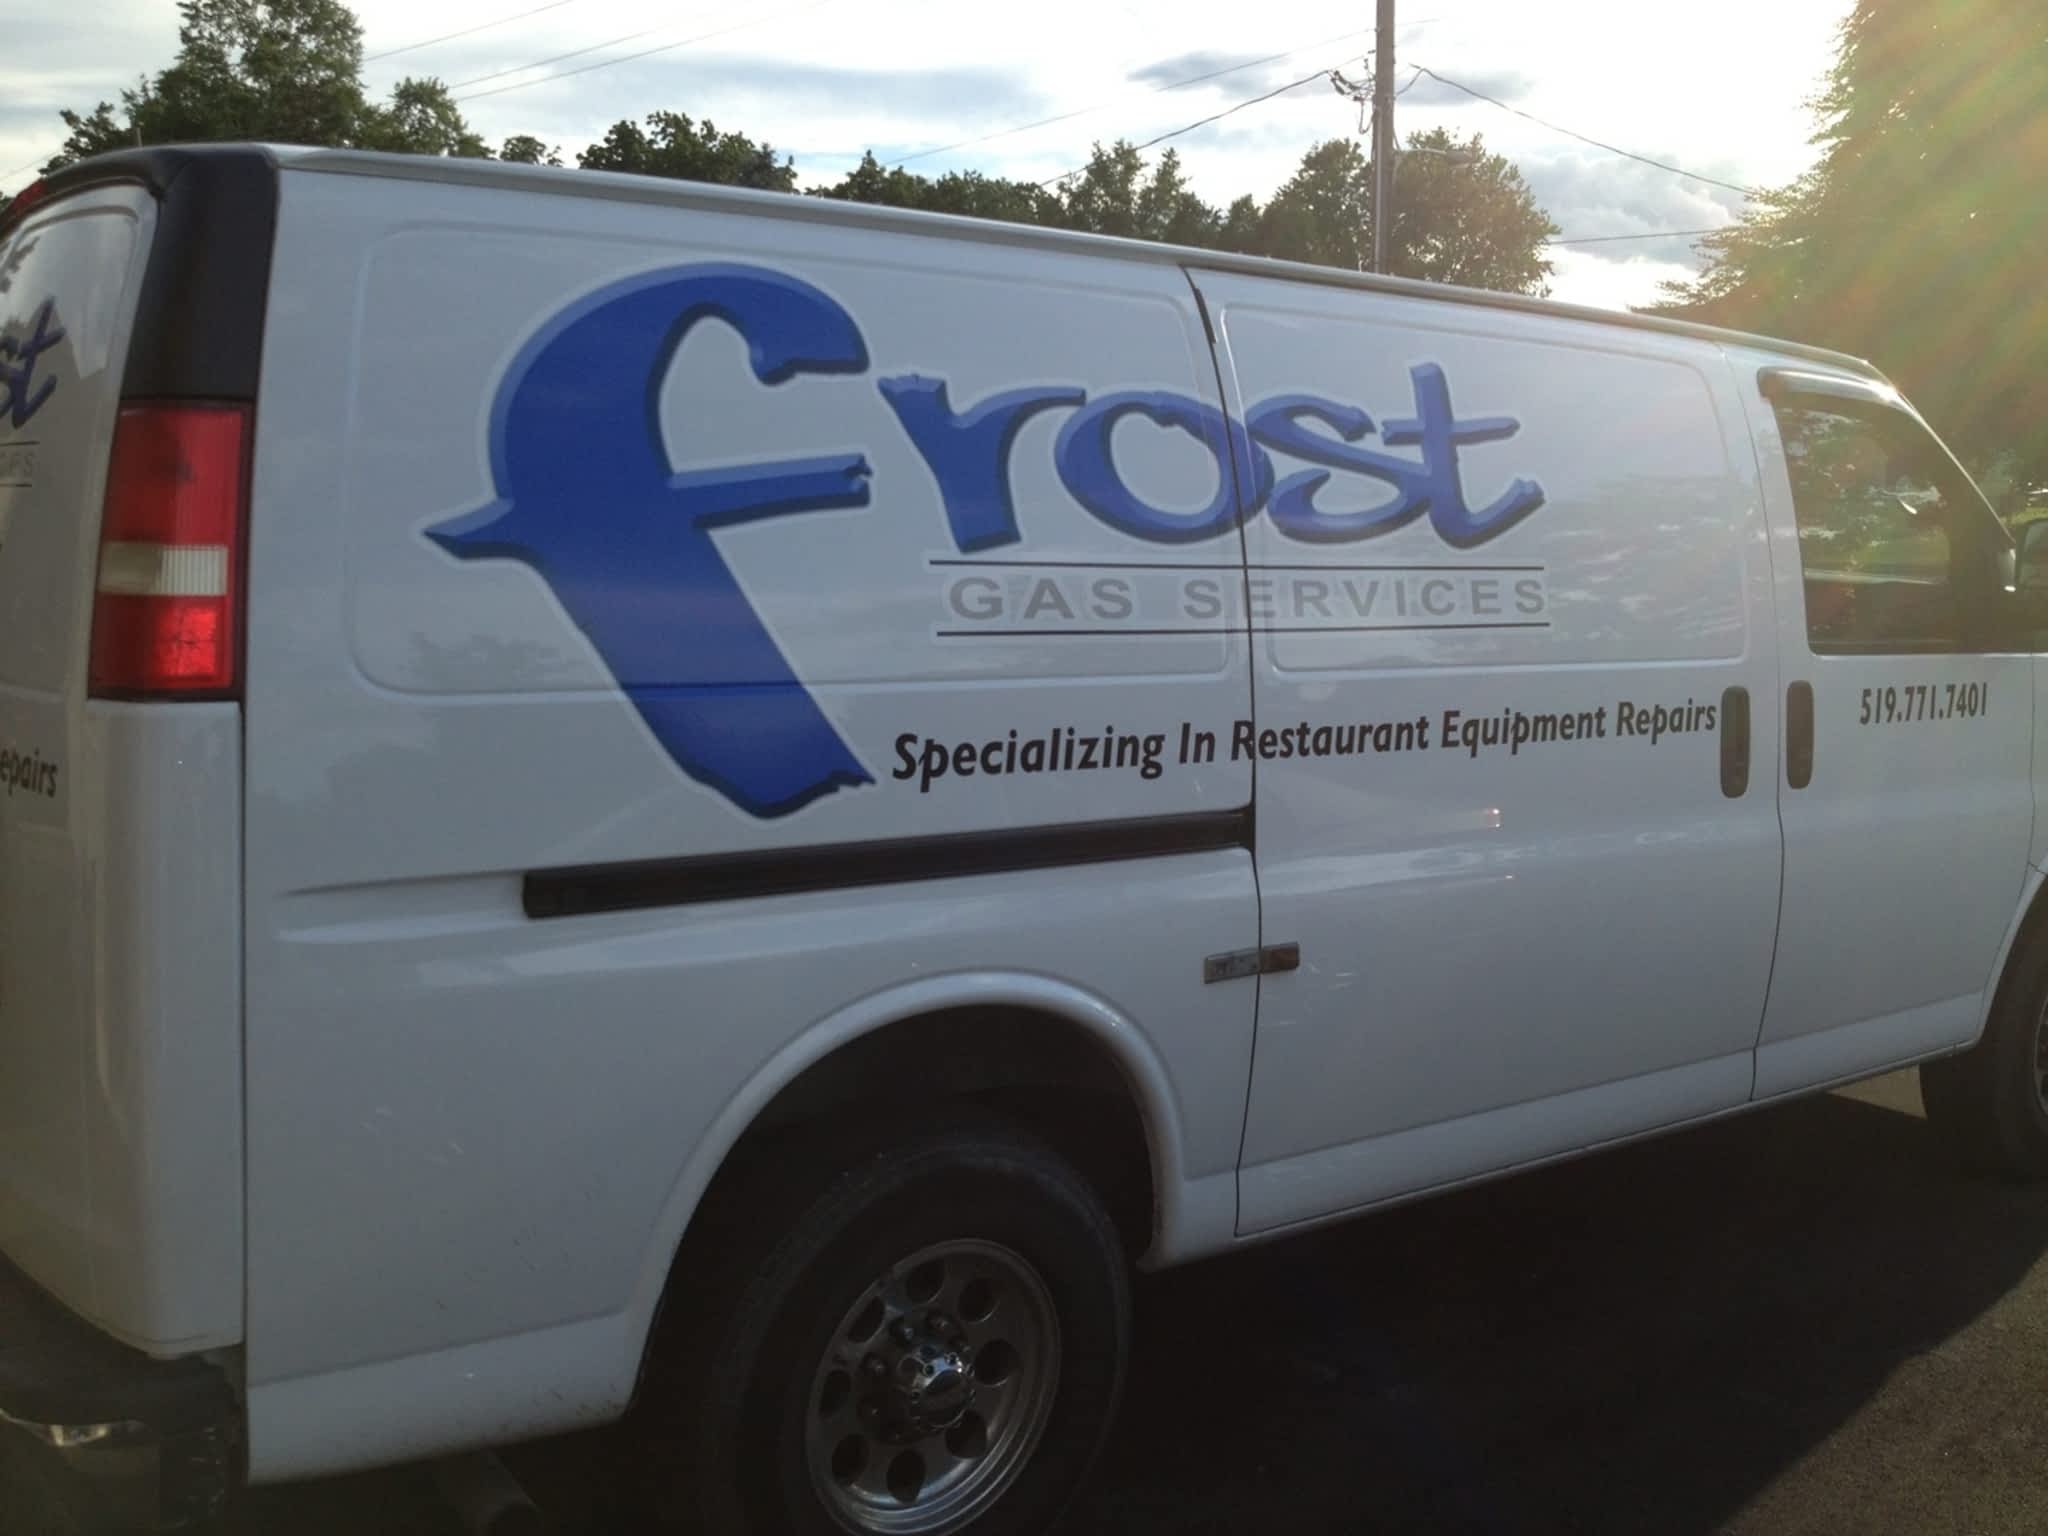 photo Frost Gas Services